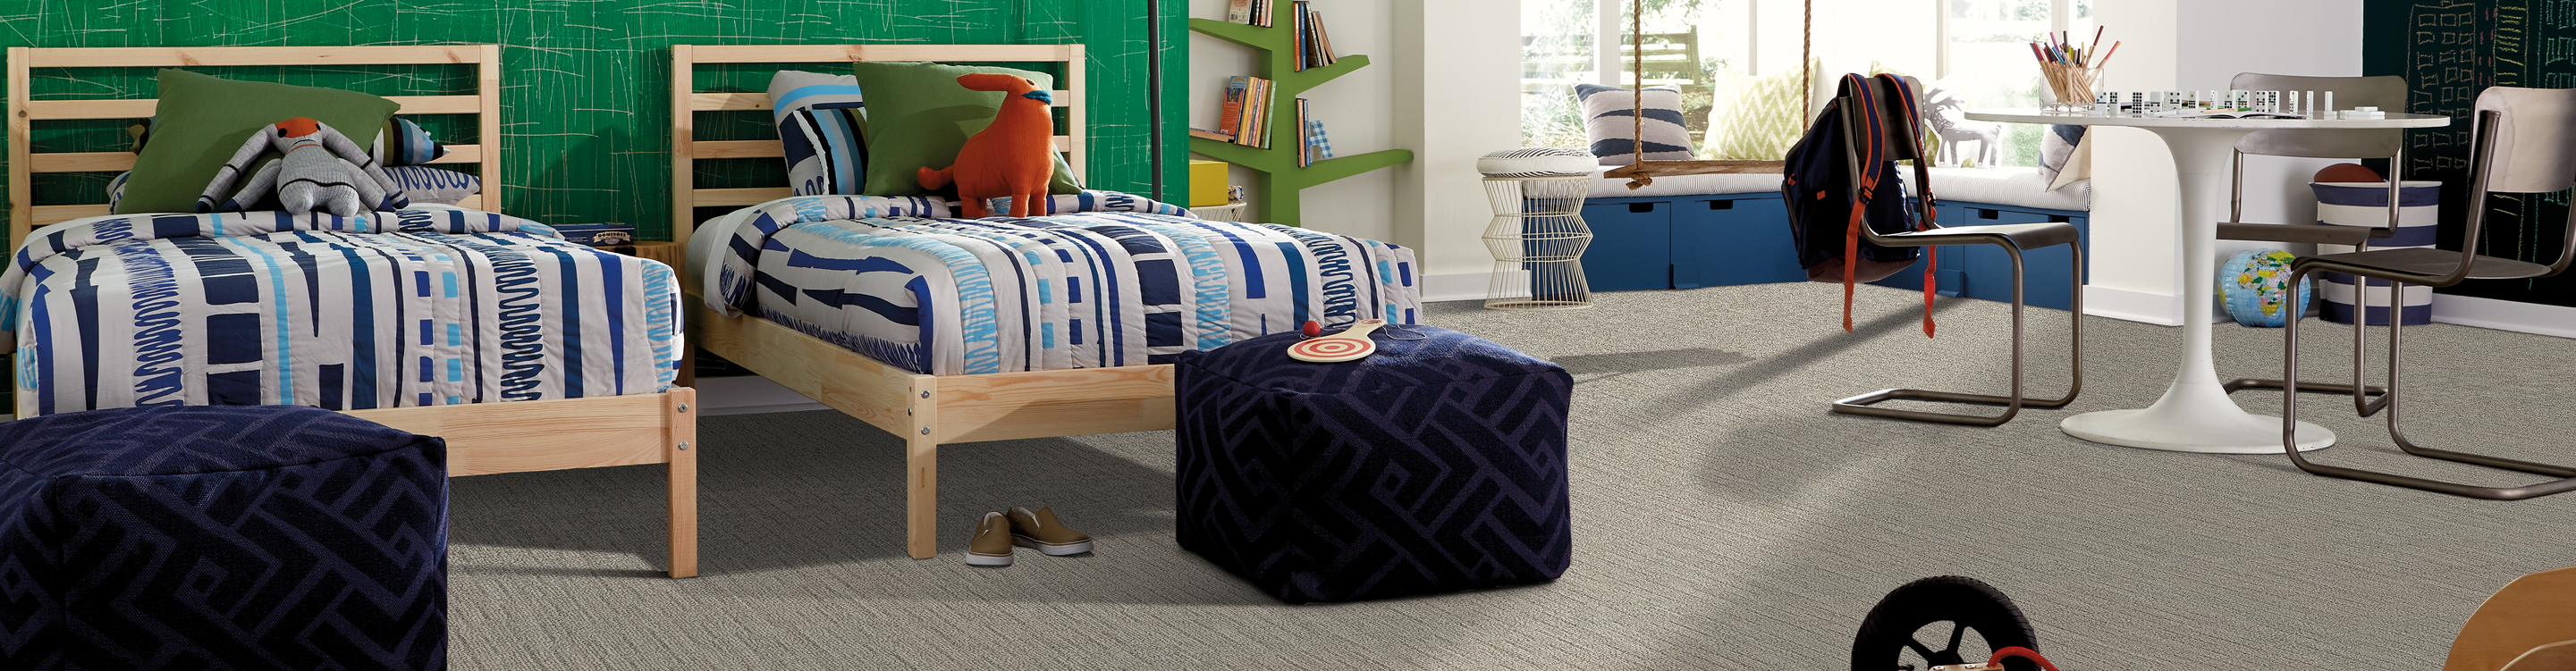 grey toned carpet in kids bedroom with wooden beds and navy cushions